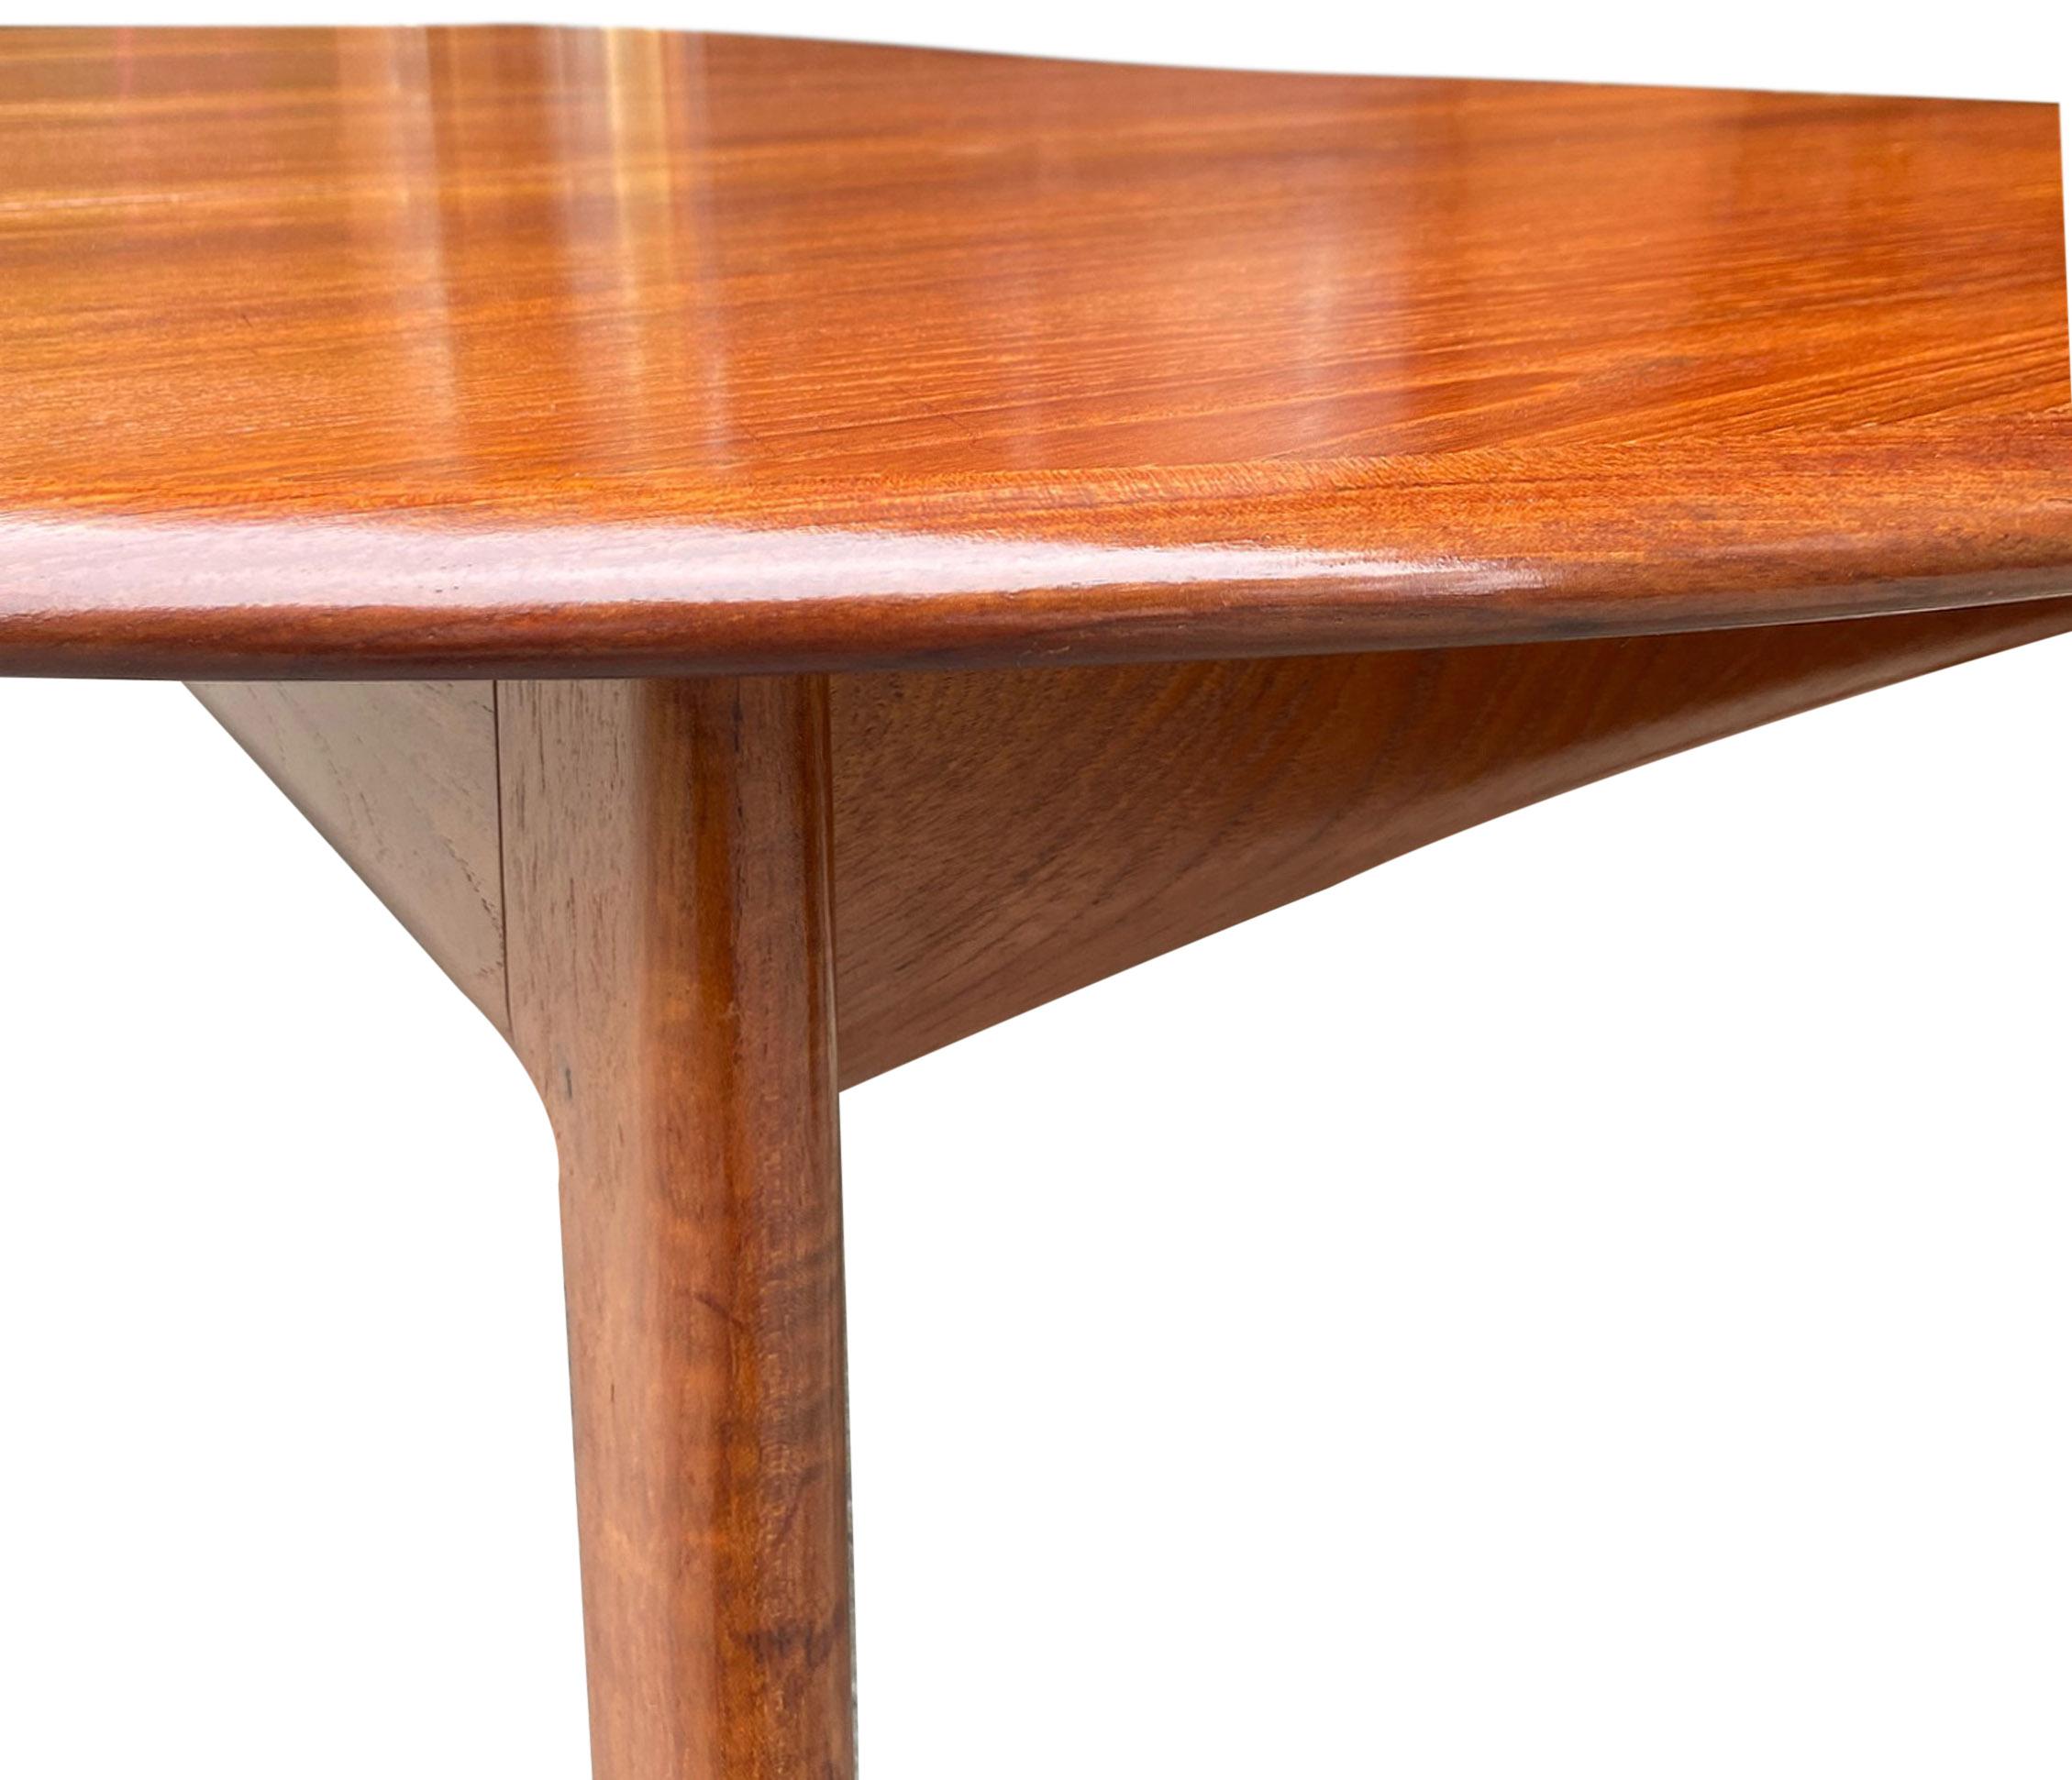 For your consideration is this gorgeous teak dining table designed by Svend Madsen. Featuring two 24'' leaves with no fading. Fully closed the table is 48'' round. The table fully extended is 96'' long. The kneehole is 23.75''. This beautiful and